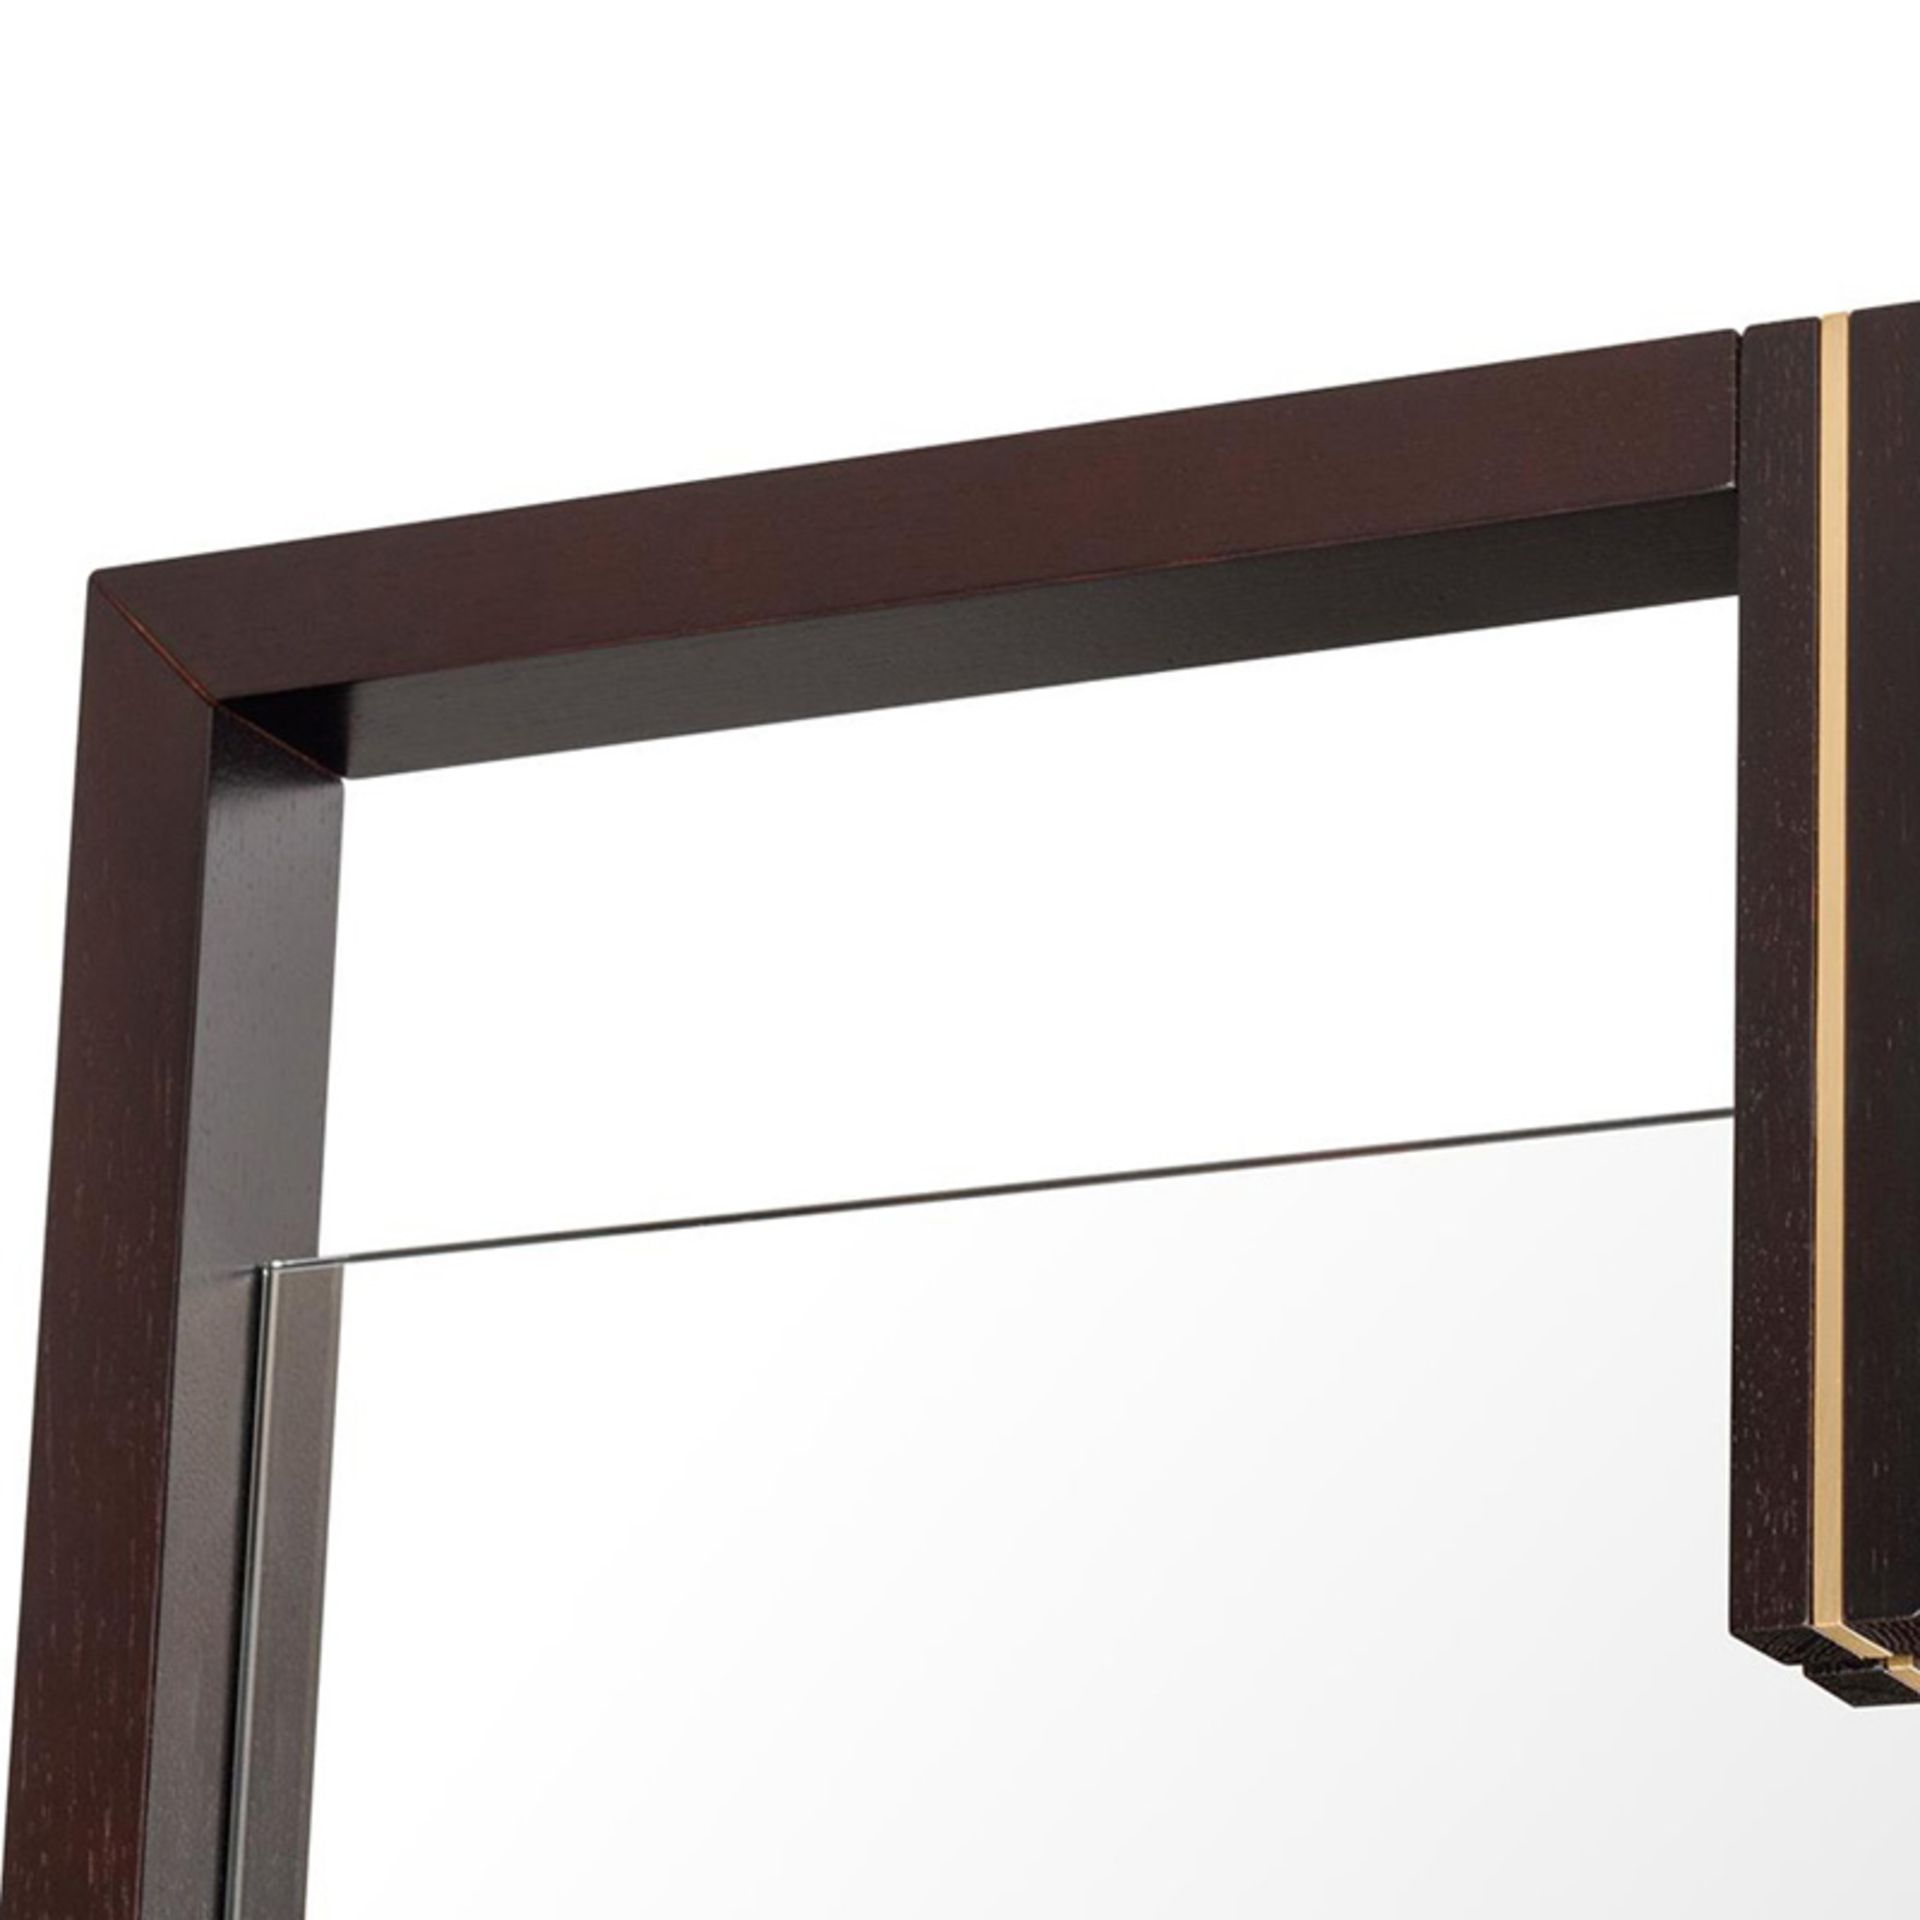 1 x FRATO Lancaster Luxury Mirror With Dark Wood Frame And Brushed Brass Details - RRP £1,288 - Image 6 of 7